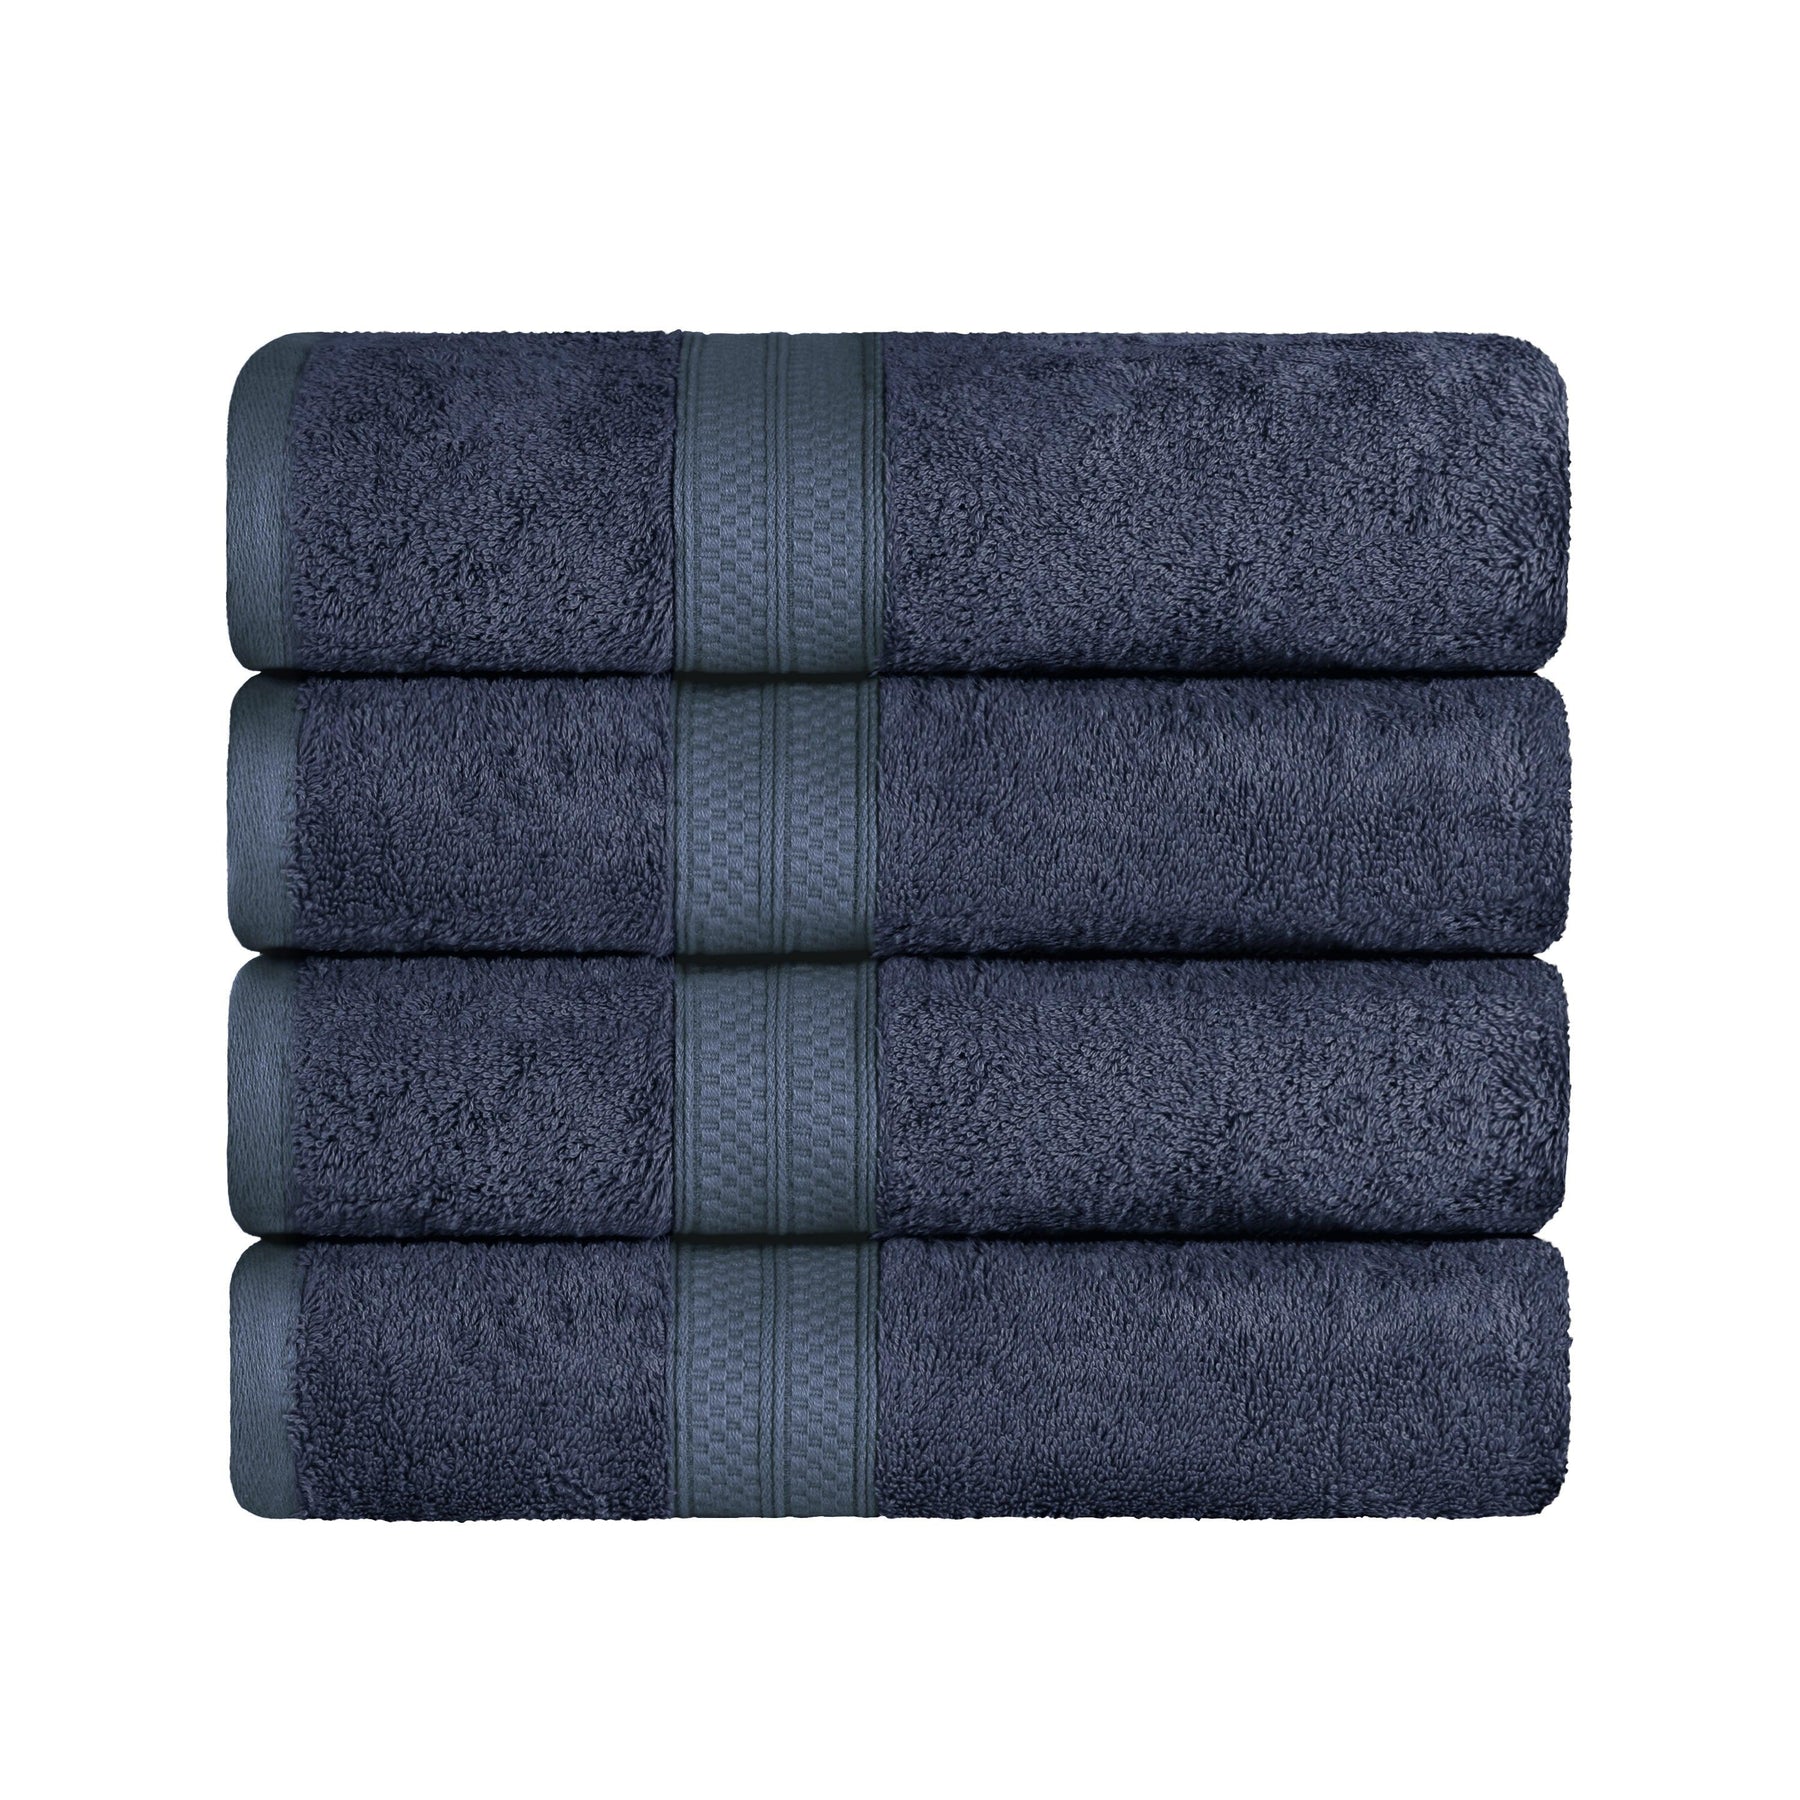  Ultra-Soft Hypoallergenic Rayon from Bamboo Cotton Blend Assorted Bath Towel Set -  River  Blue